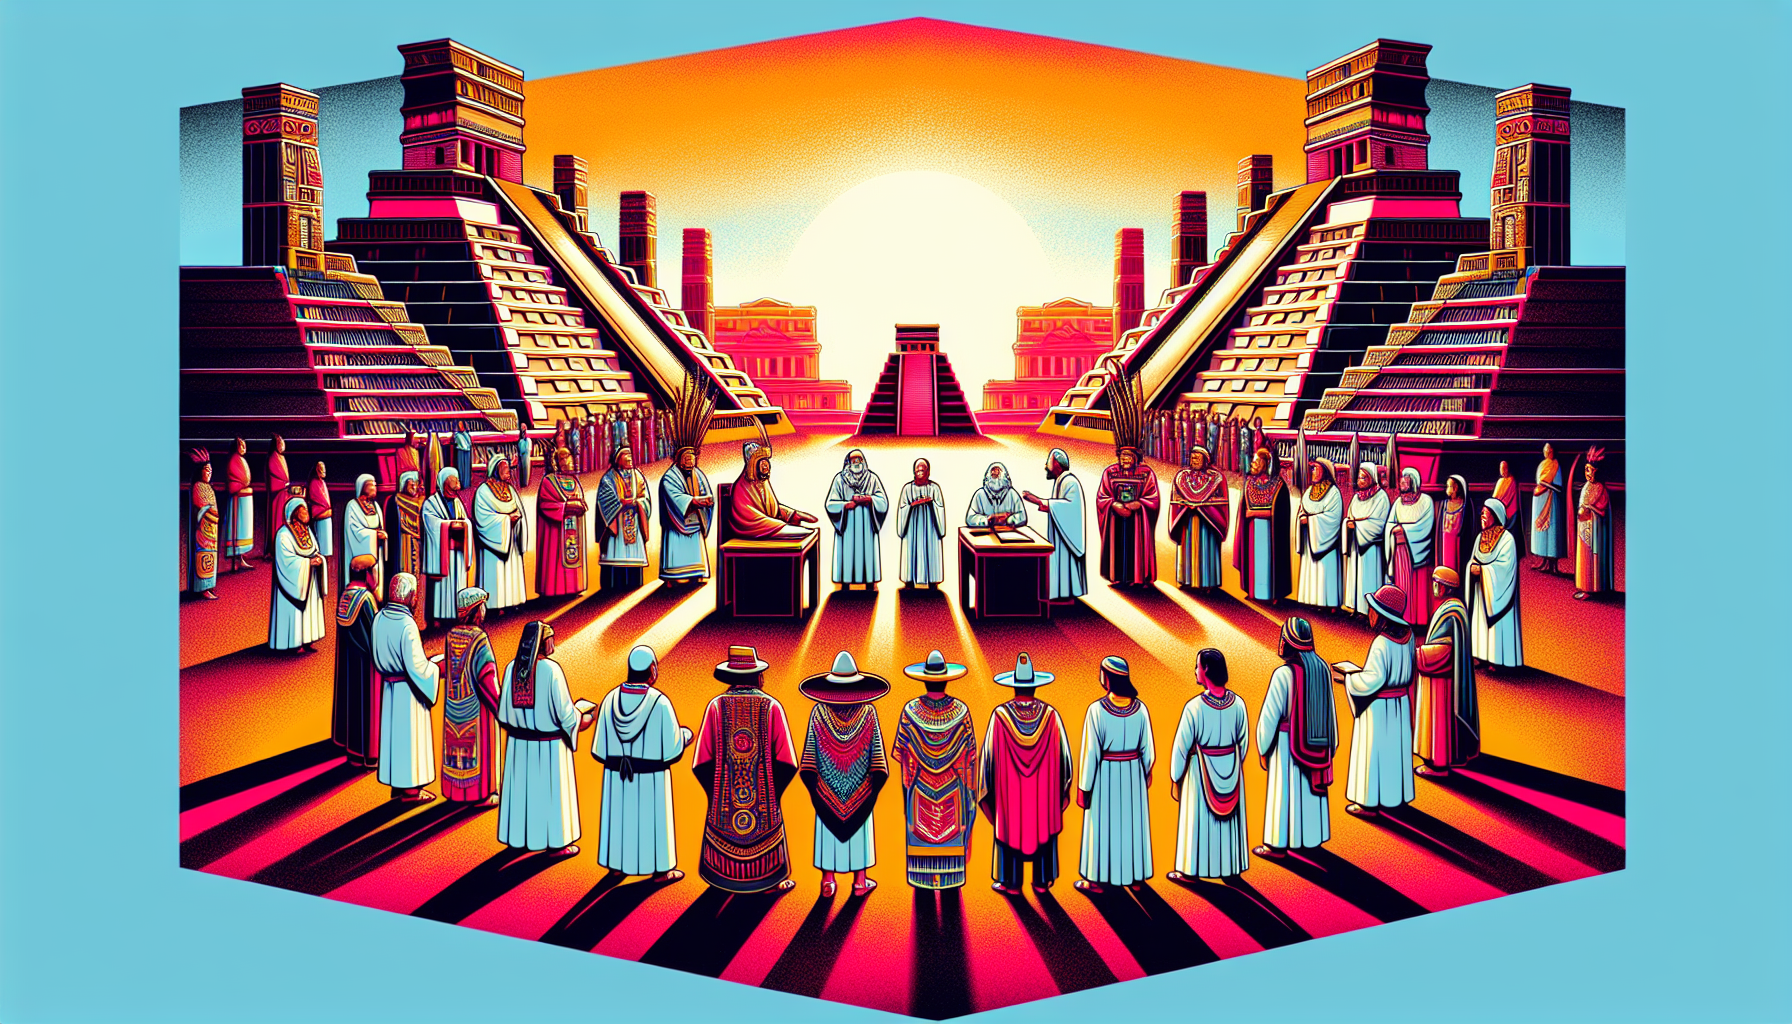 An imaginative scene depicting Christian missionaries discussing religious concepts with Aztec leaders in an ancient Mesoamerican city, with detailed Aztec architecture and clothing contrasting with t